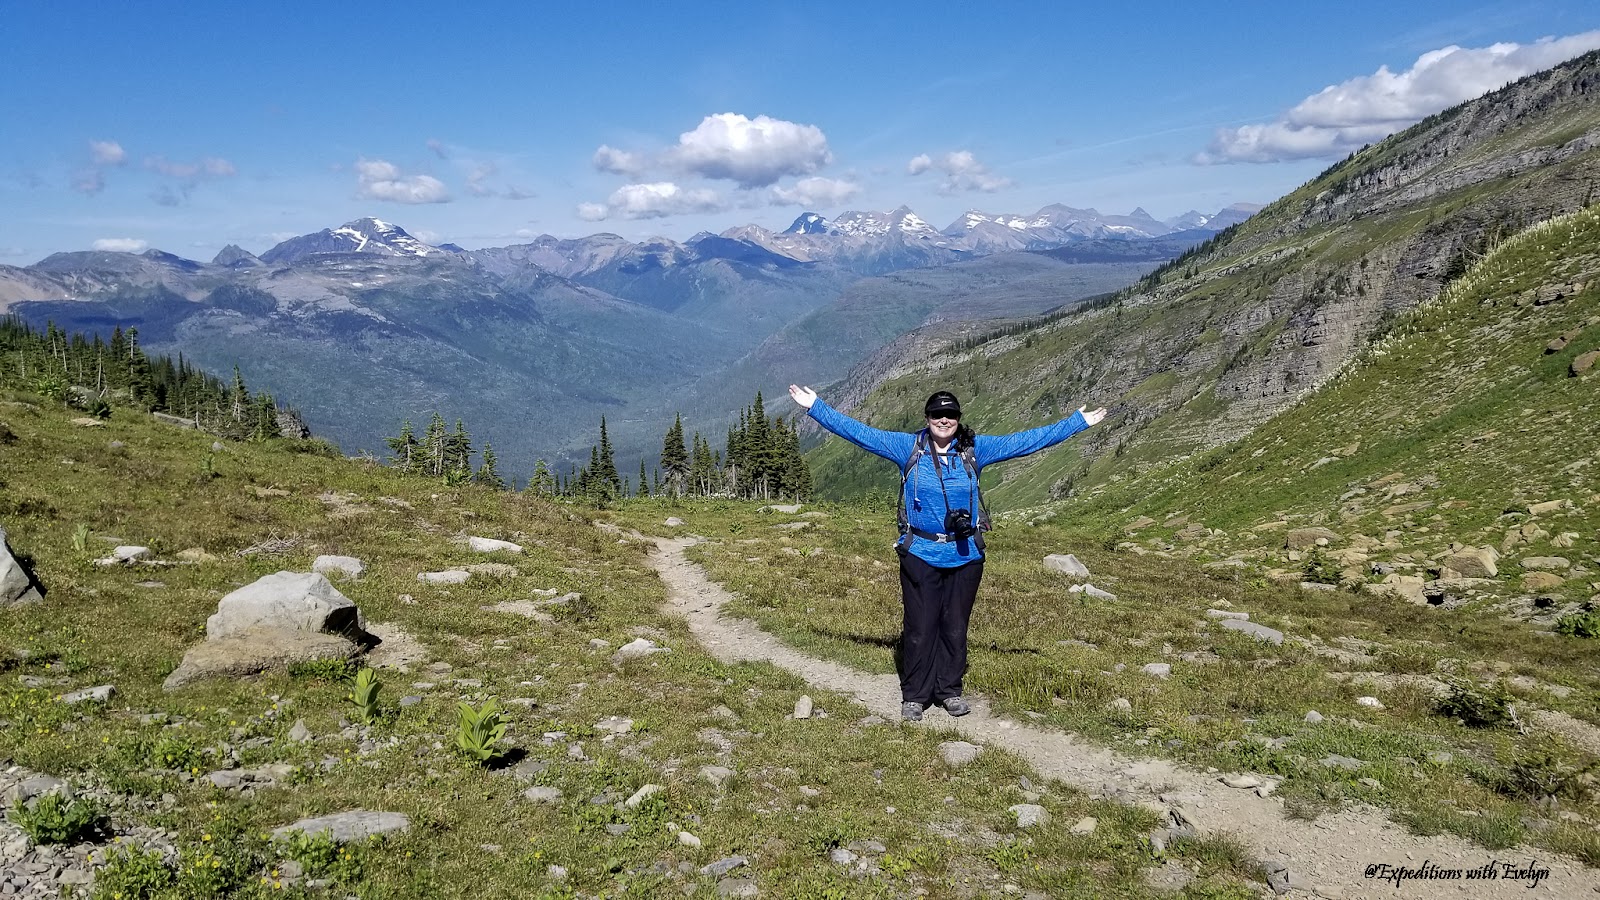 A female hiker embraces hiking in national parks with open arms on a mountain trail surrounded by small rocks, pine trees, and distance mountain peaks.